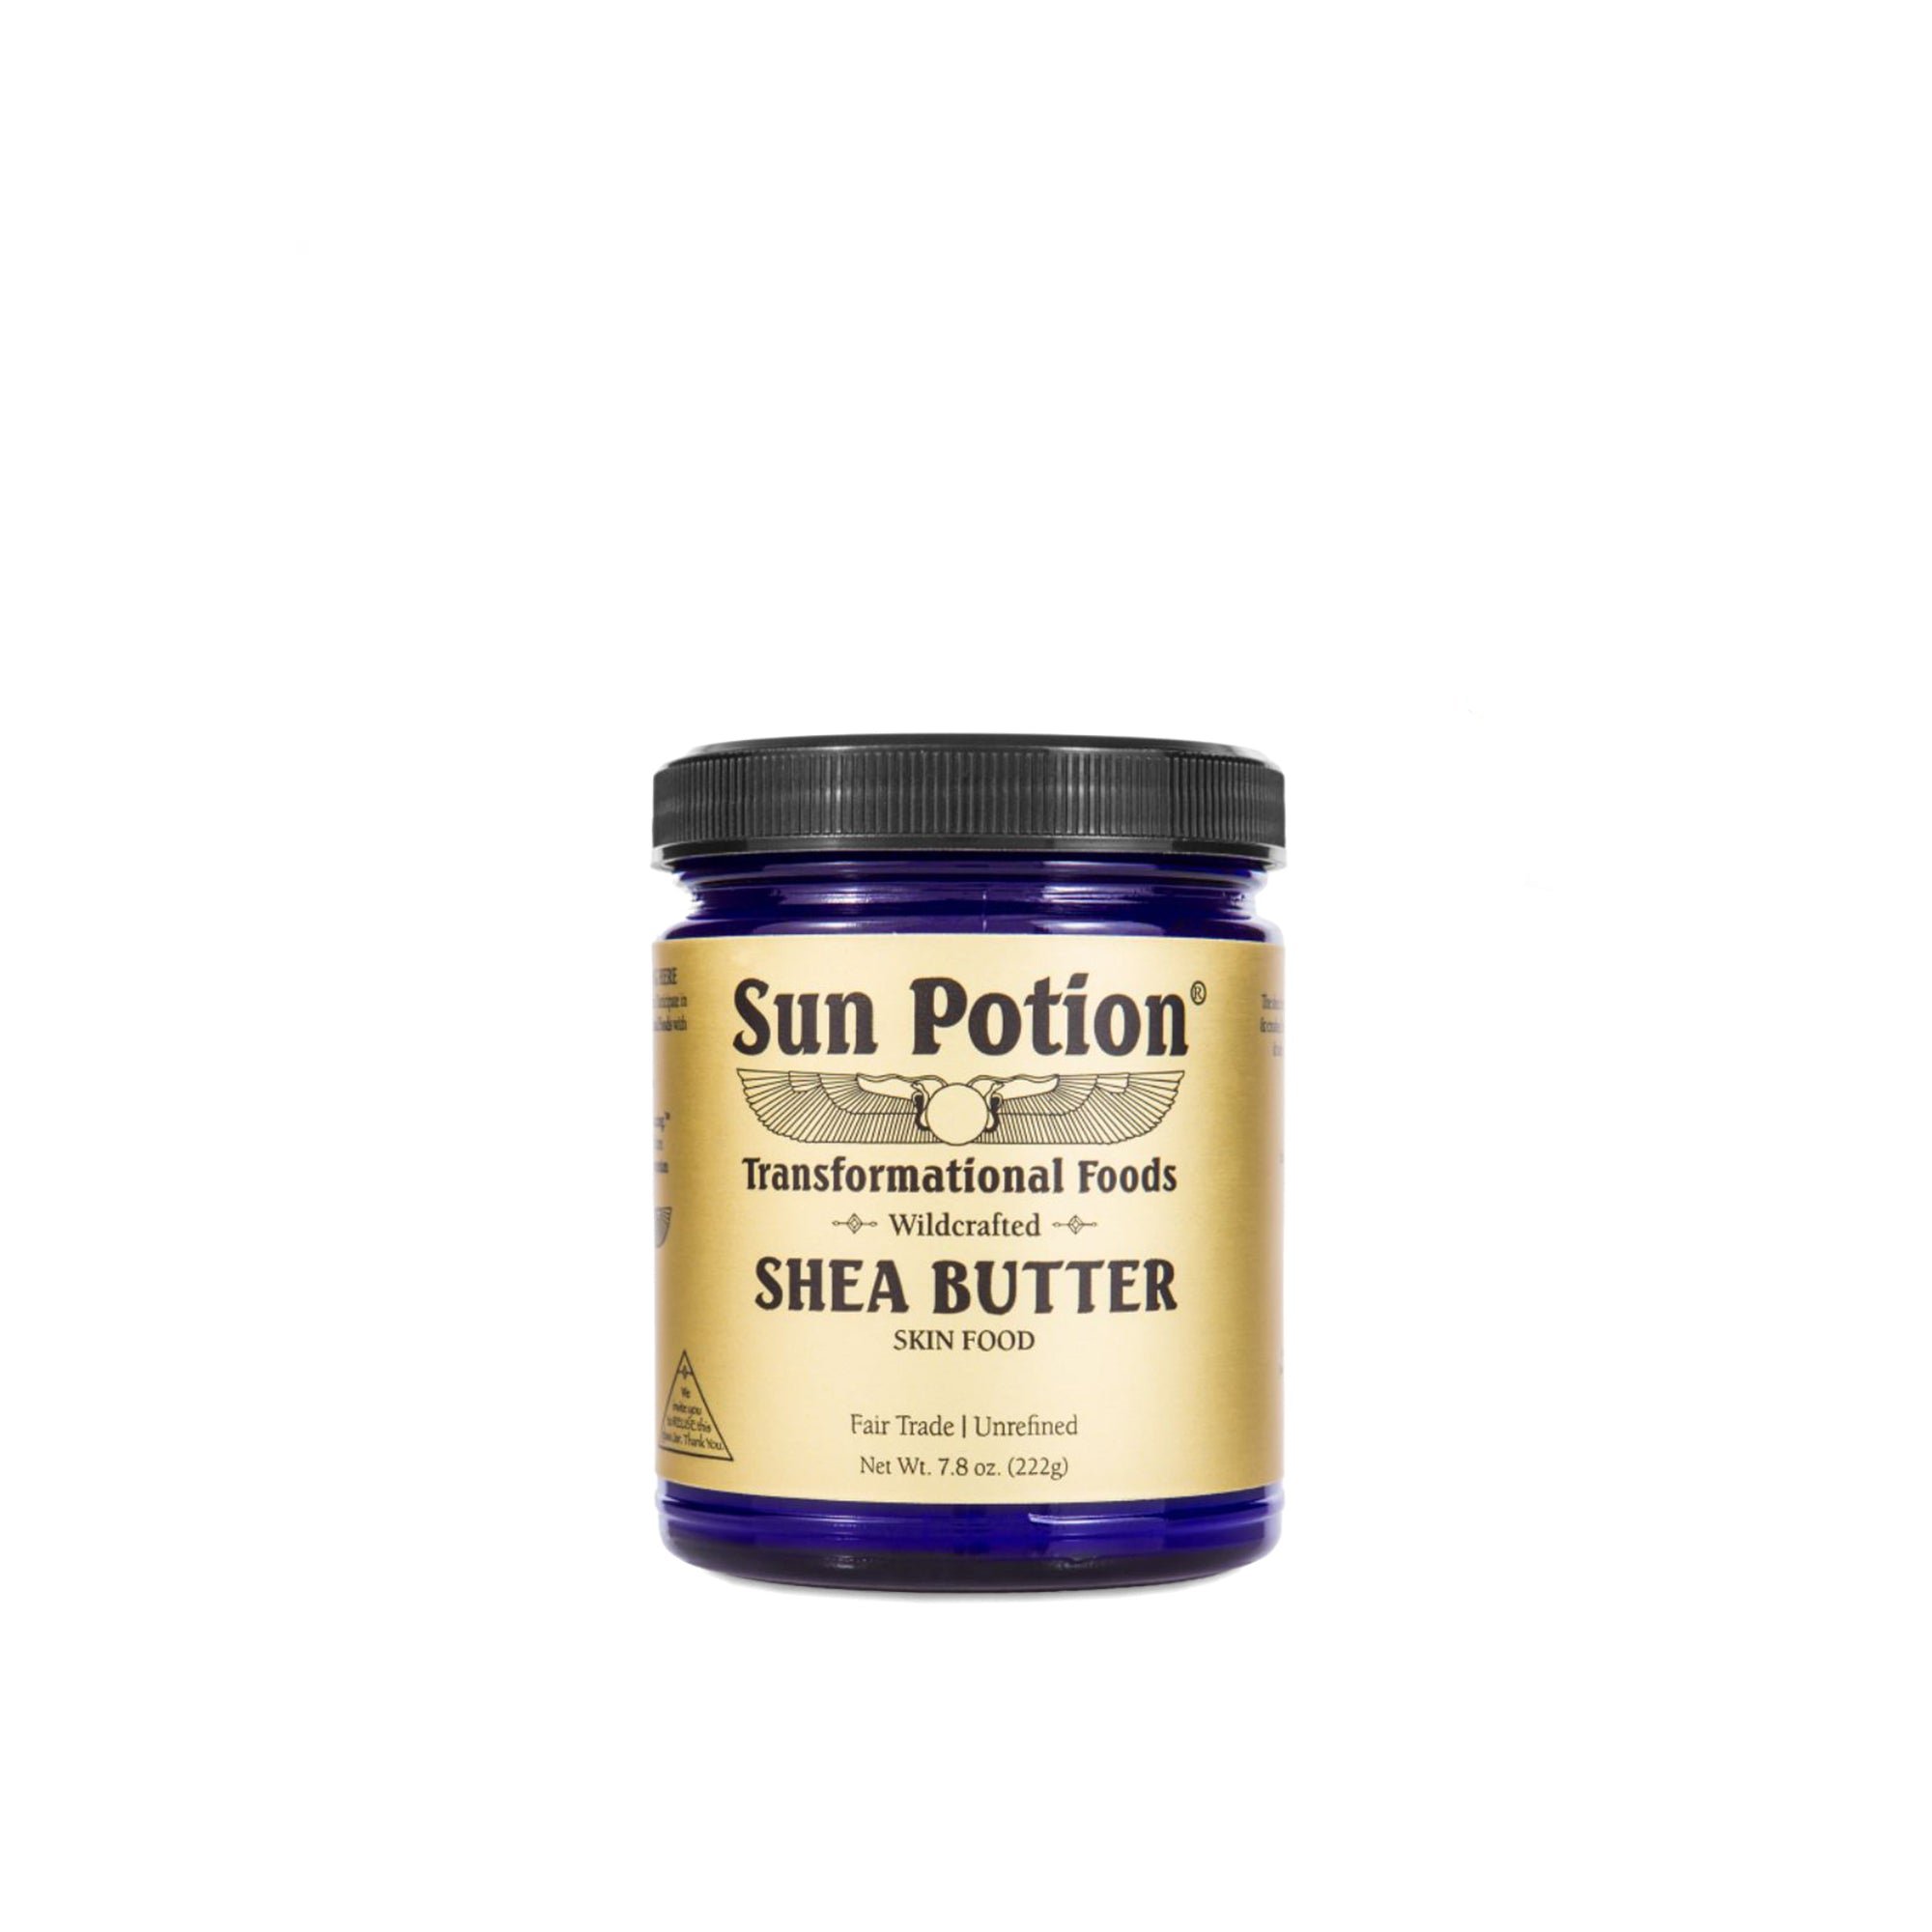 Shea Butter - Wildcrafted and Unrefined